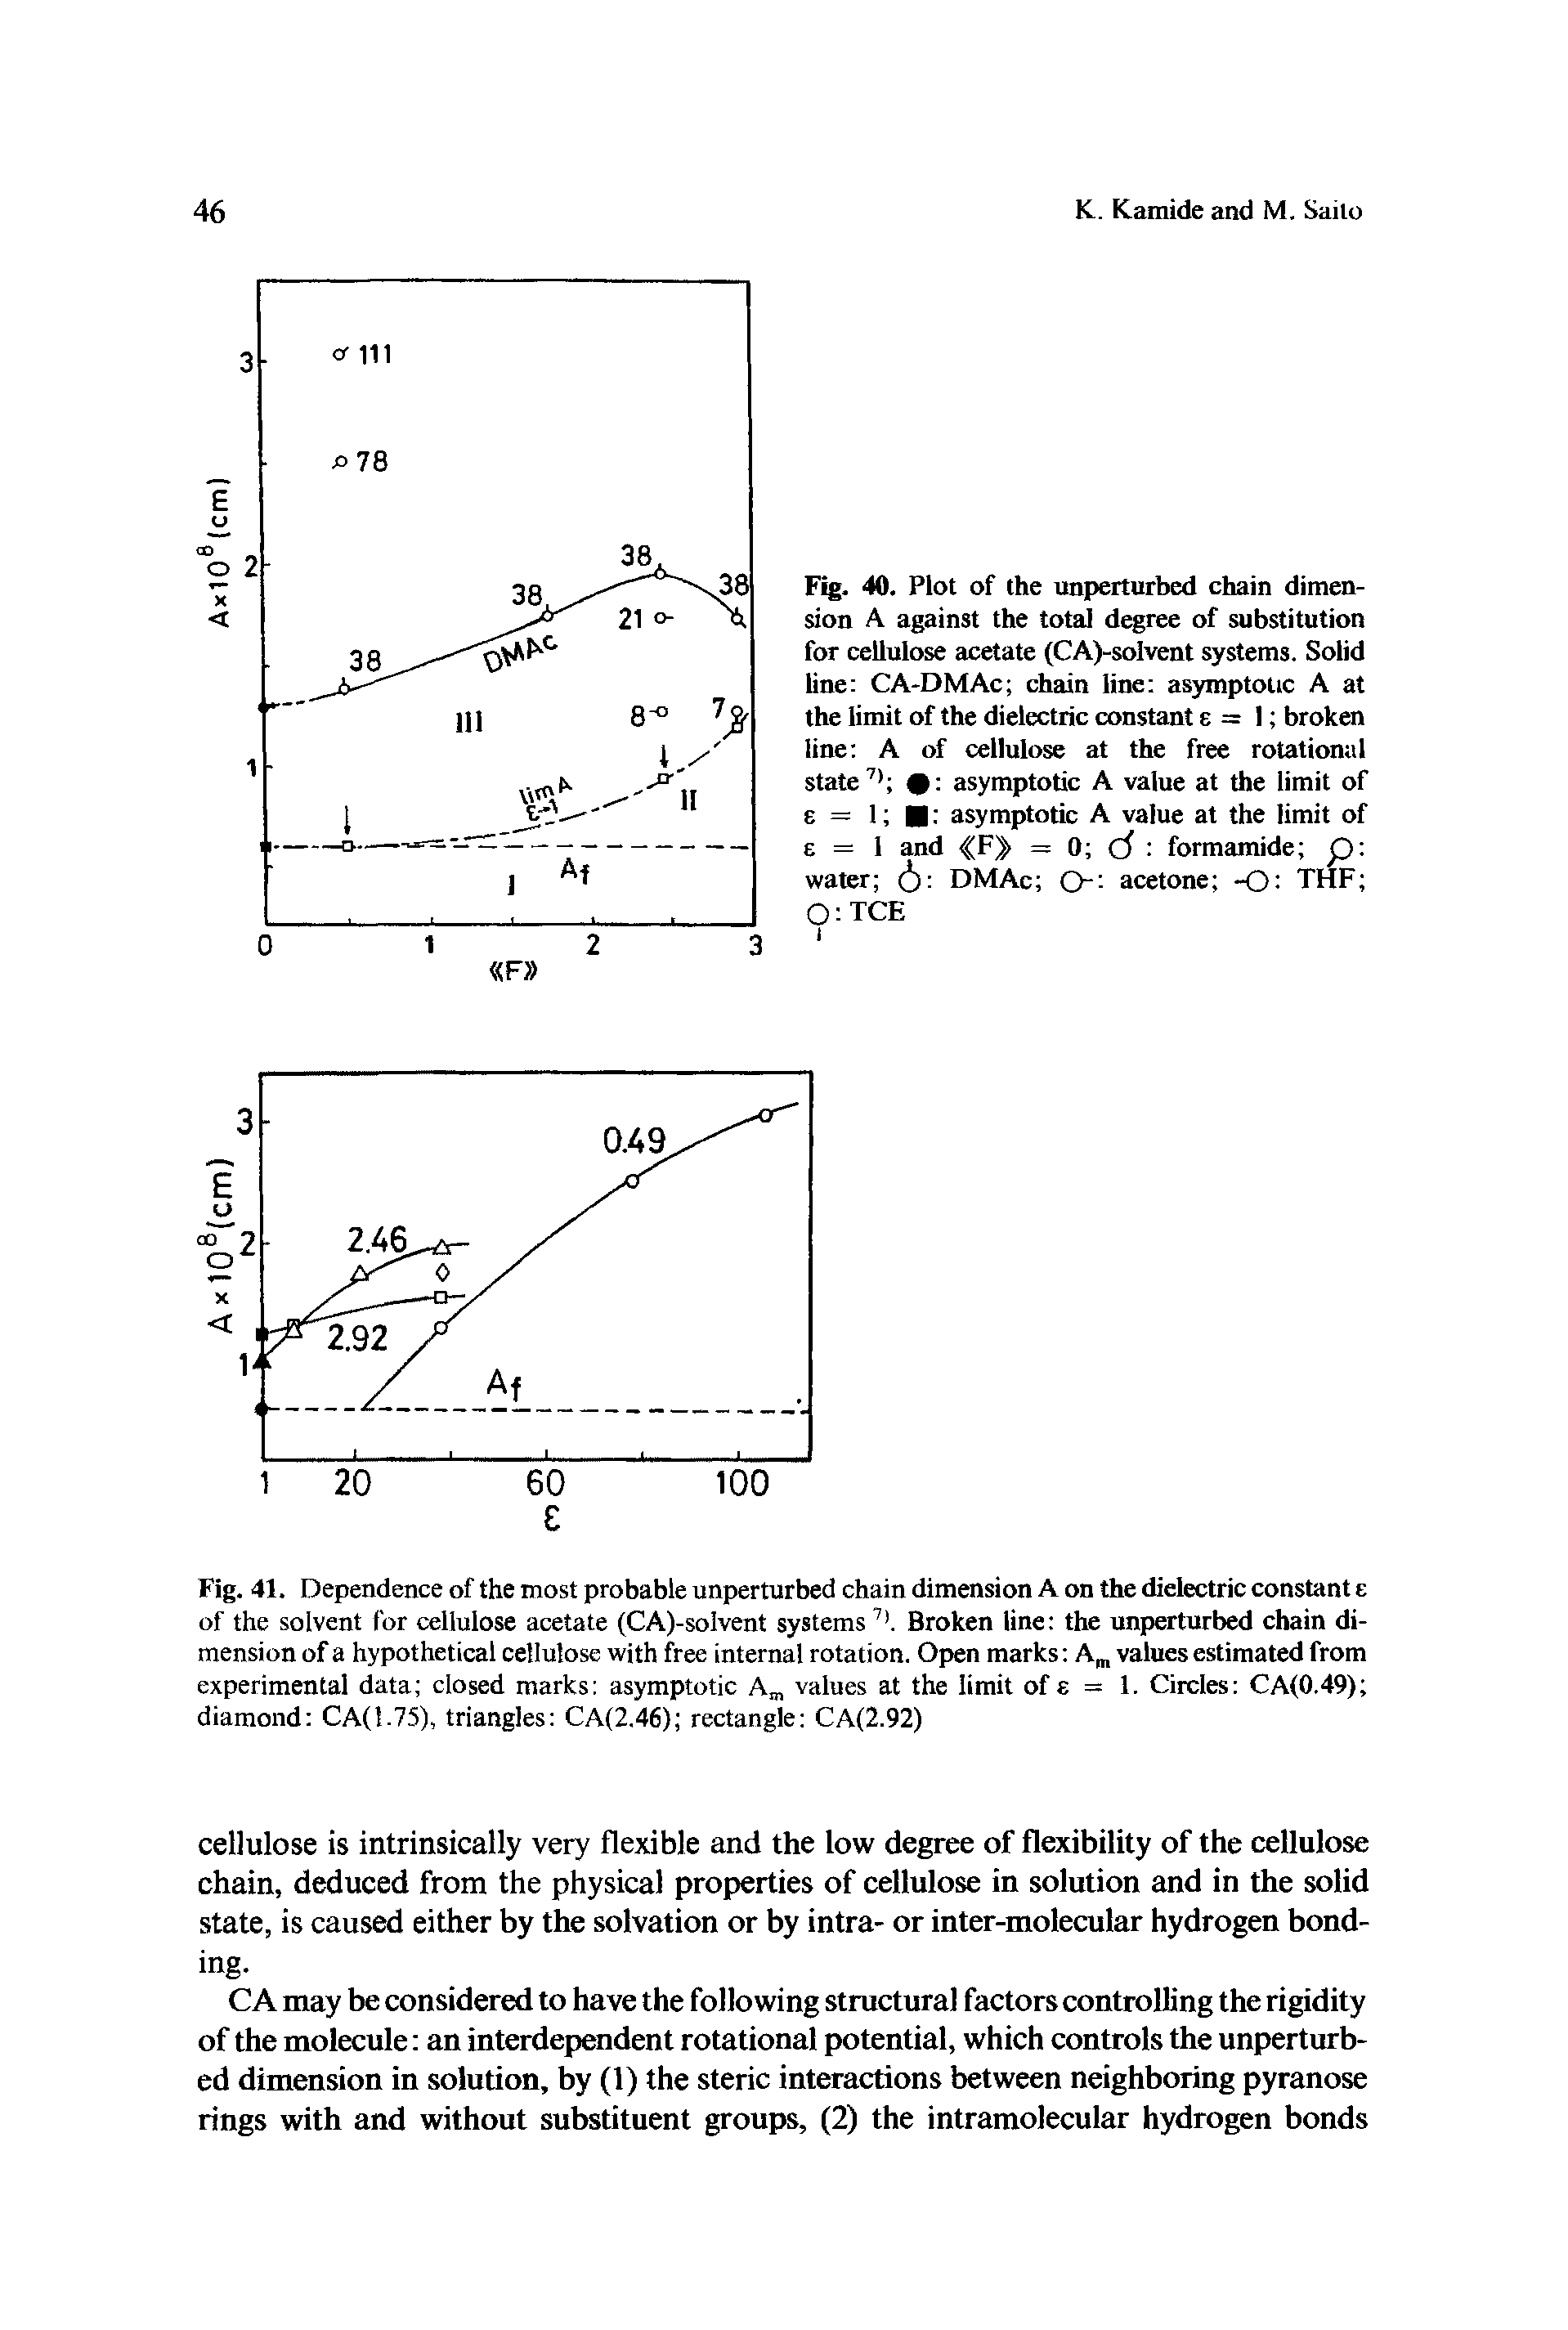 Fig. 41. Dependence of the most probable unperturbed chain dimension A on the dielectric constant e of the solvent for cellulose acetate (CA)-solvent systems7). Broken line the unperturbed chain dimension of a hypothetical cellulose with free internal rotation. Open marks Am values estimated from experimental data closed marks asymptotic Am values at the limit of e = 1. Circles CA(0.49) diamond CA(1.75), triangles CA(2.46) rectangle CA(2.92)...